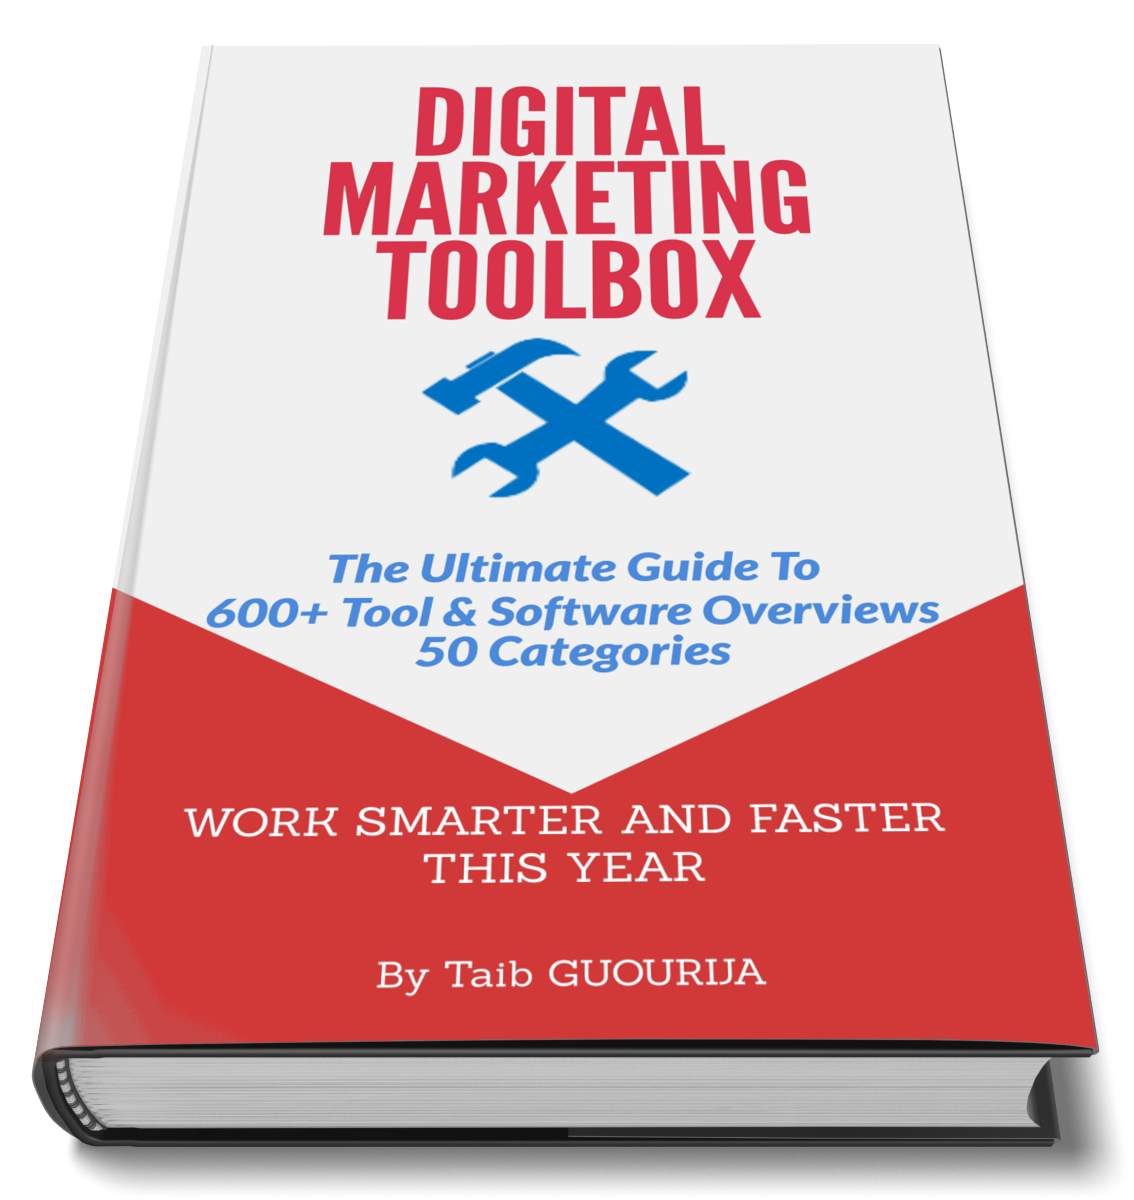 Digital Marketing Toolbox - The Ultimate Guide To
600+ Tool & Software Overviews
50 Categories

 

/ WORK SMARTER AND FASTER
THIS YEAR

| By Taib GUOURDA